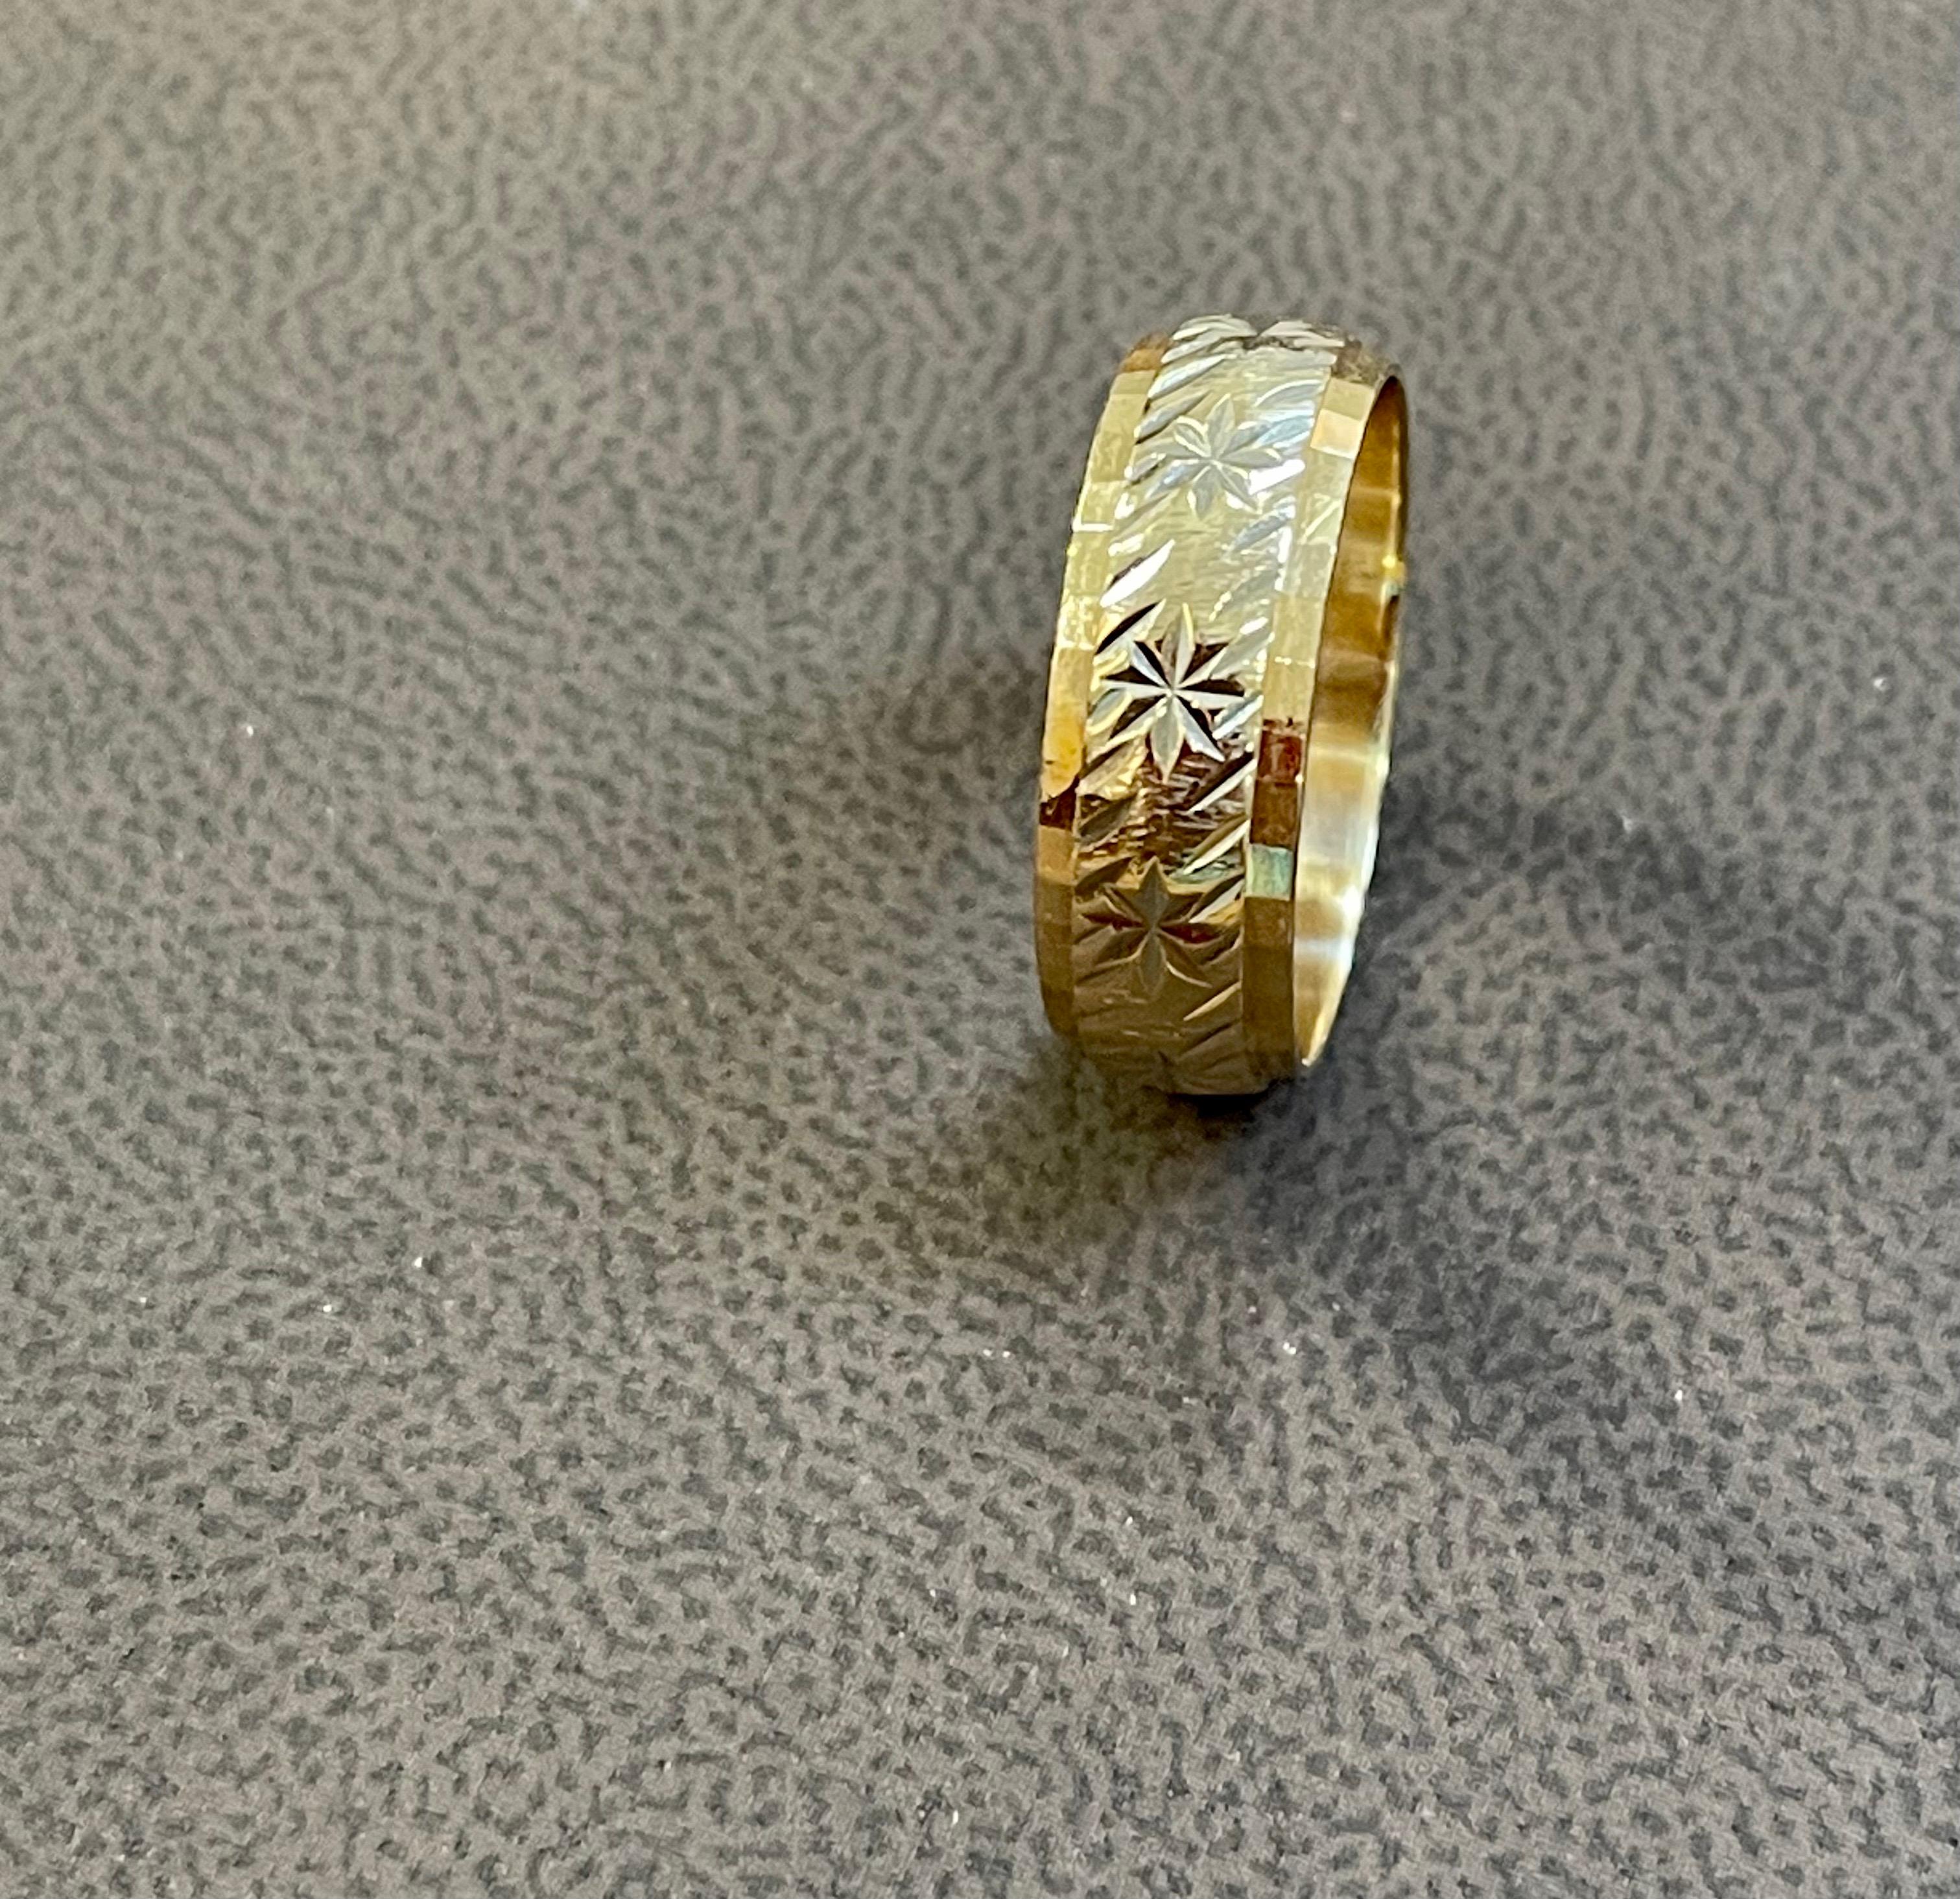 14 Karat Yellow Gold Classic Wide Star Wedding Band With Design Ring, Unisex In Excellent Condition For Sale In New York, NY